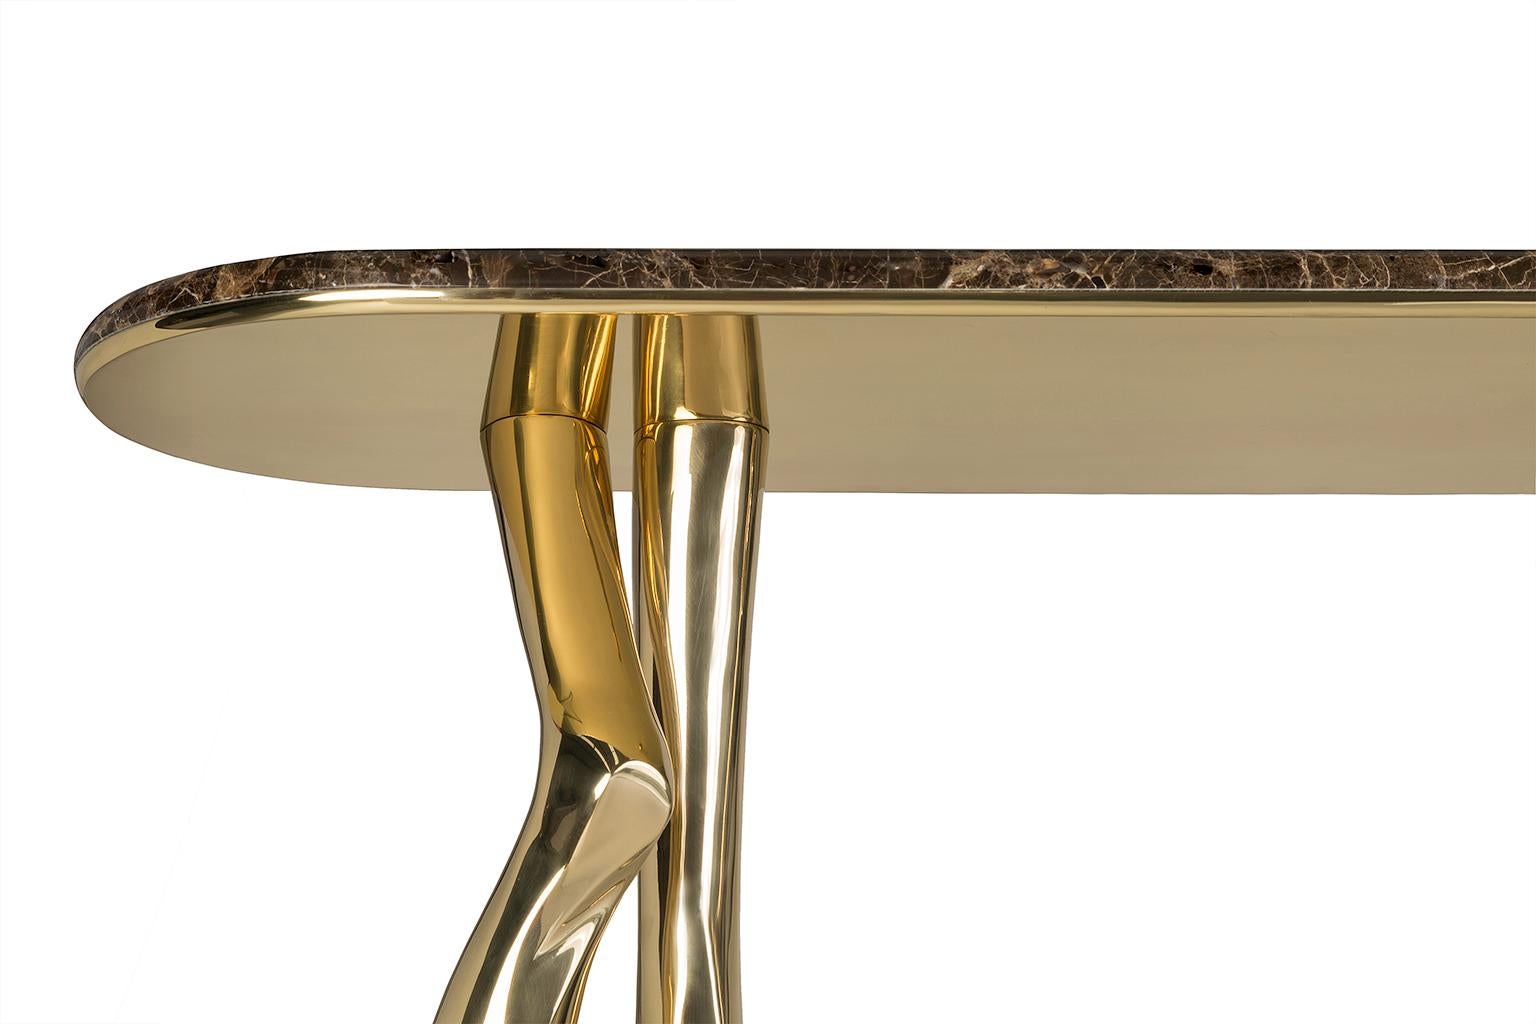 Cast Contemporary Sculptural Monroe Console Table, Polished Brass and Brown Marble For Sale